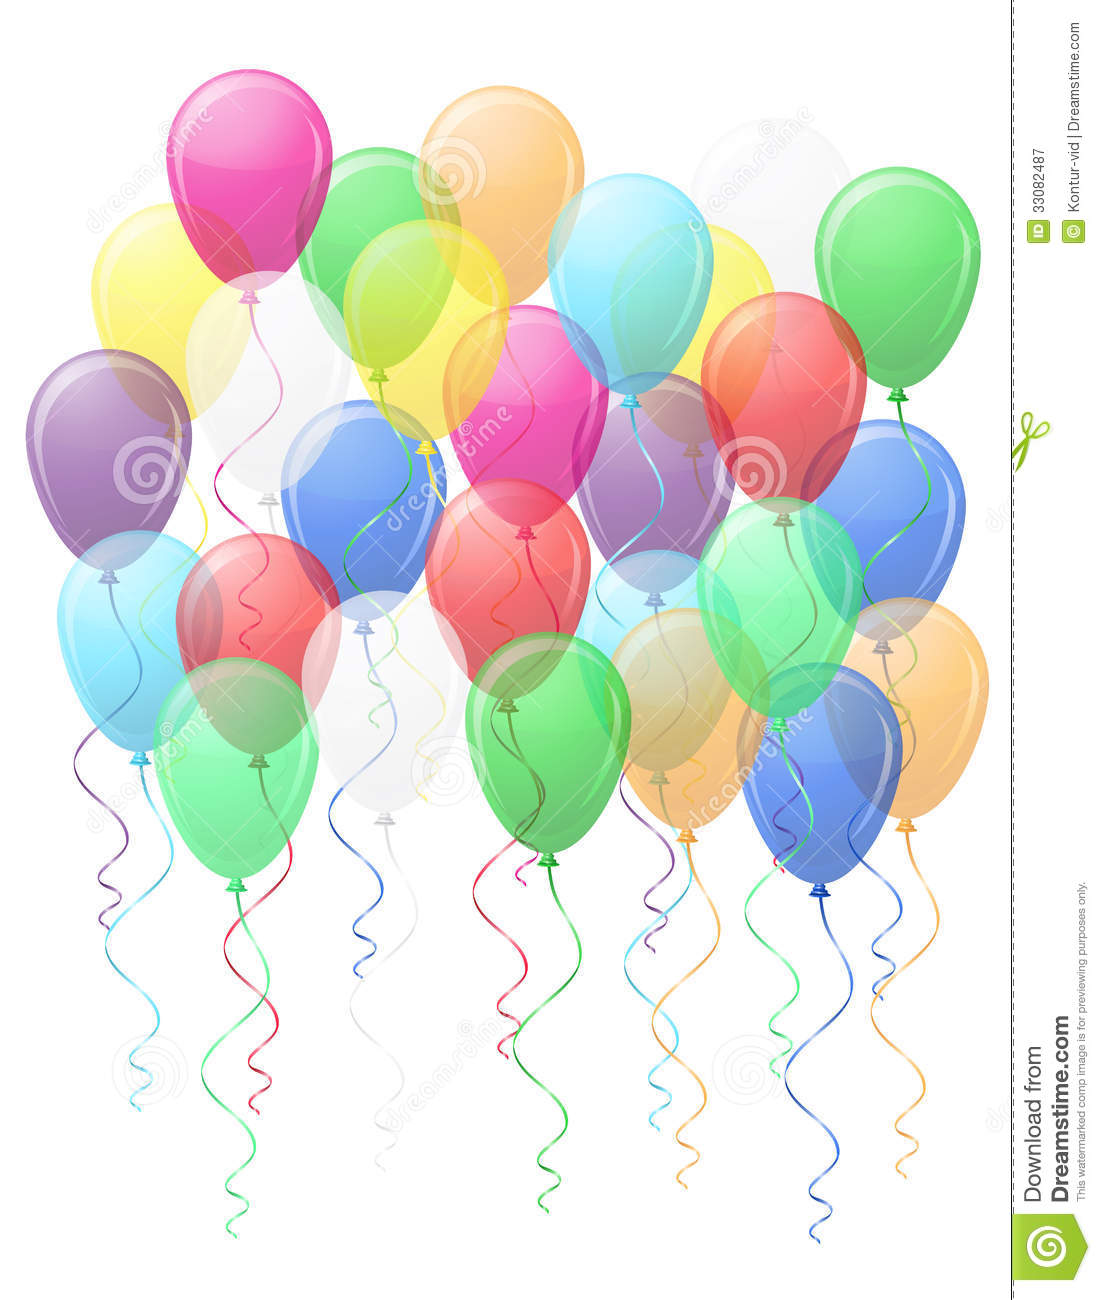 Colored Transparent Balloons Vector Illustration E Royalty Free Stock